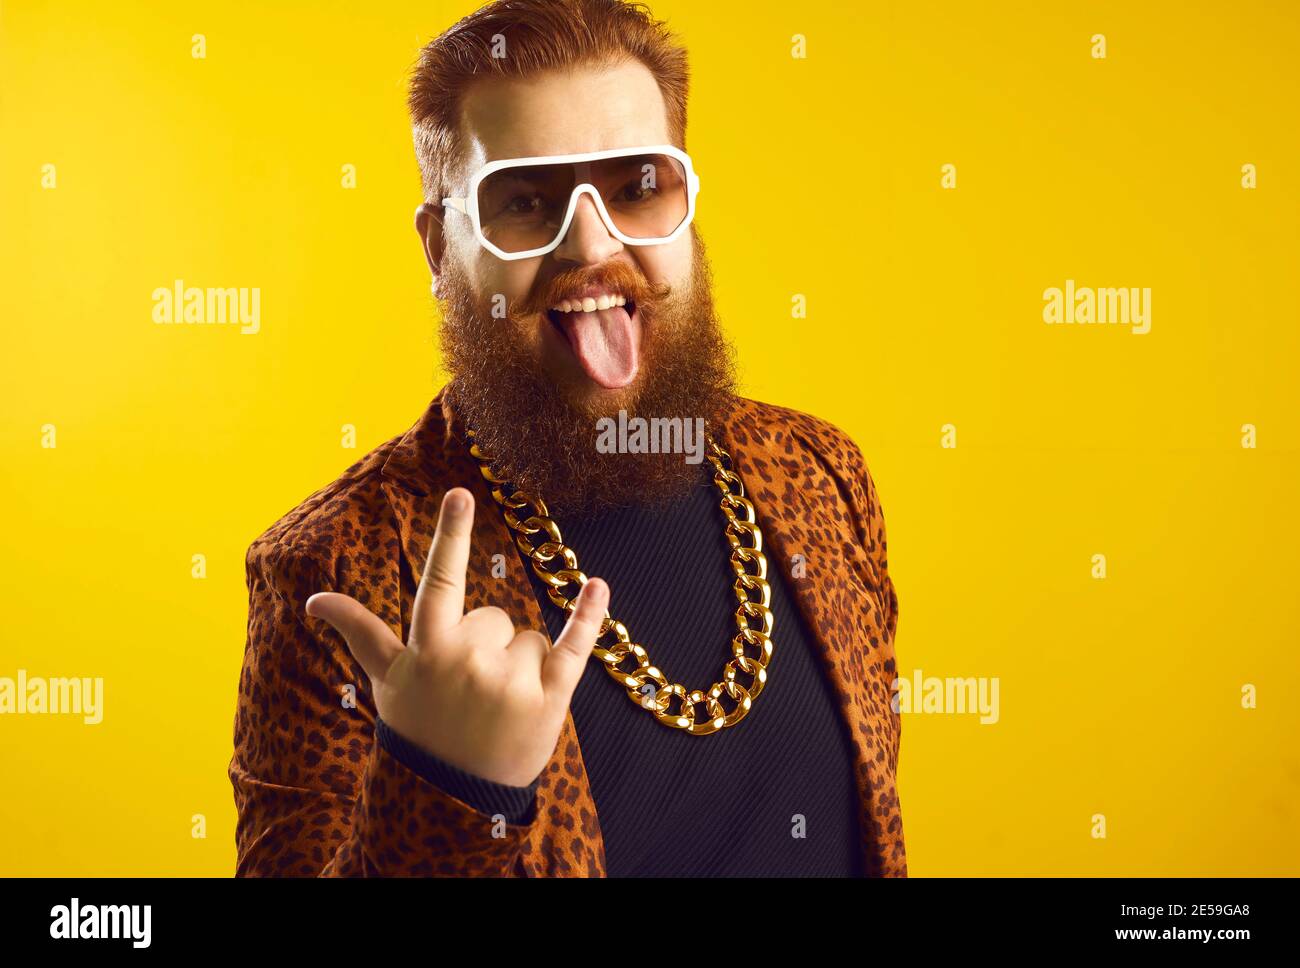 Funny eccentric bearded man in extravagant outfit doing horn sign and sticking tongue out Stock Photo